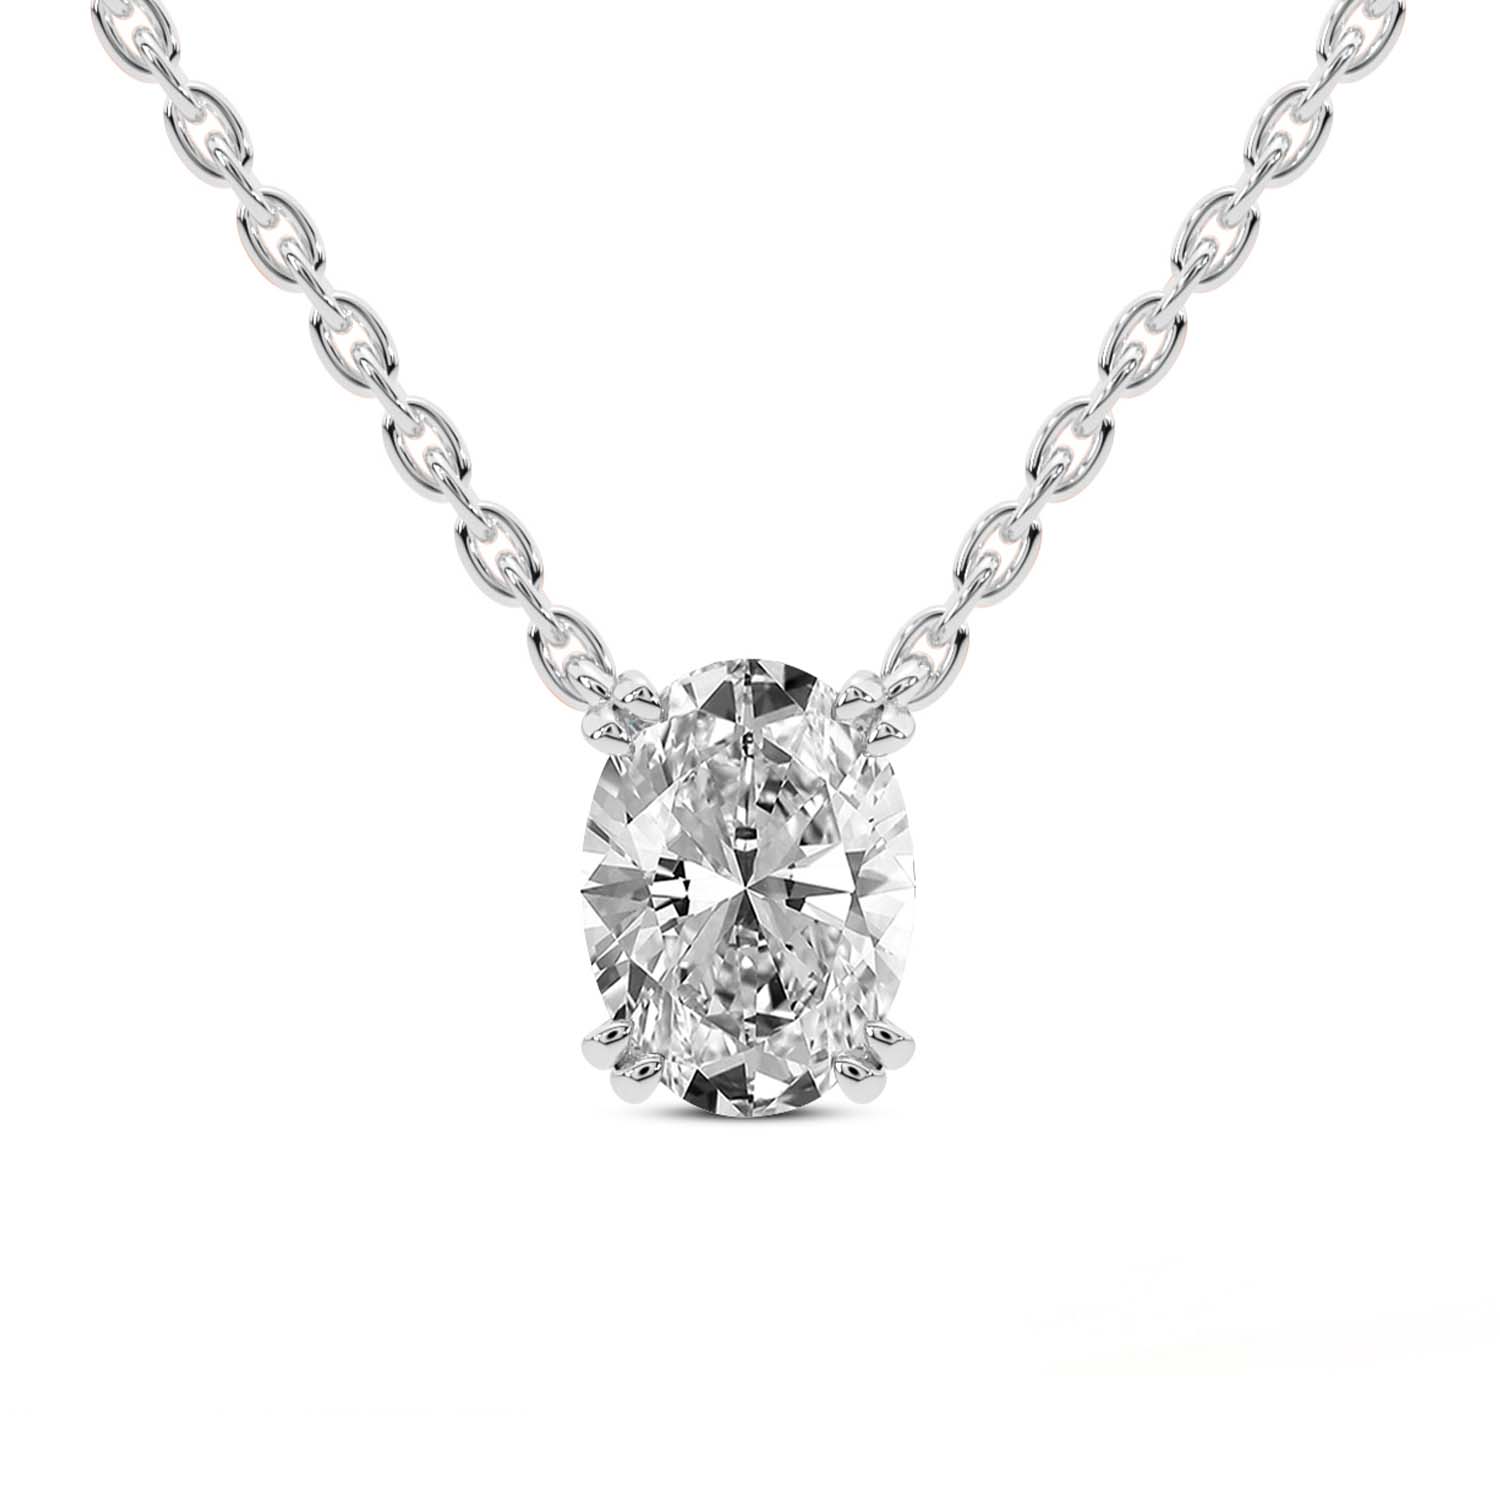 Macy's Diamond Tennis Necklace (3 ct. t.w.) in 14k White Gold or 14k Yellow  Gold - Macy's